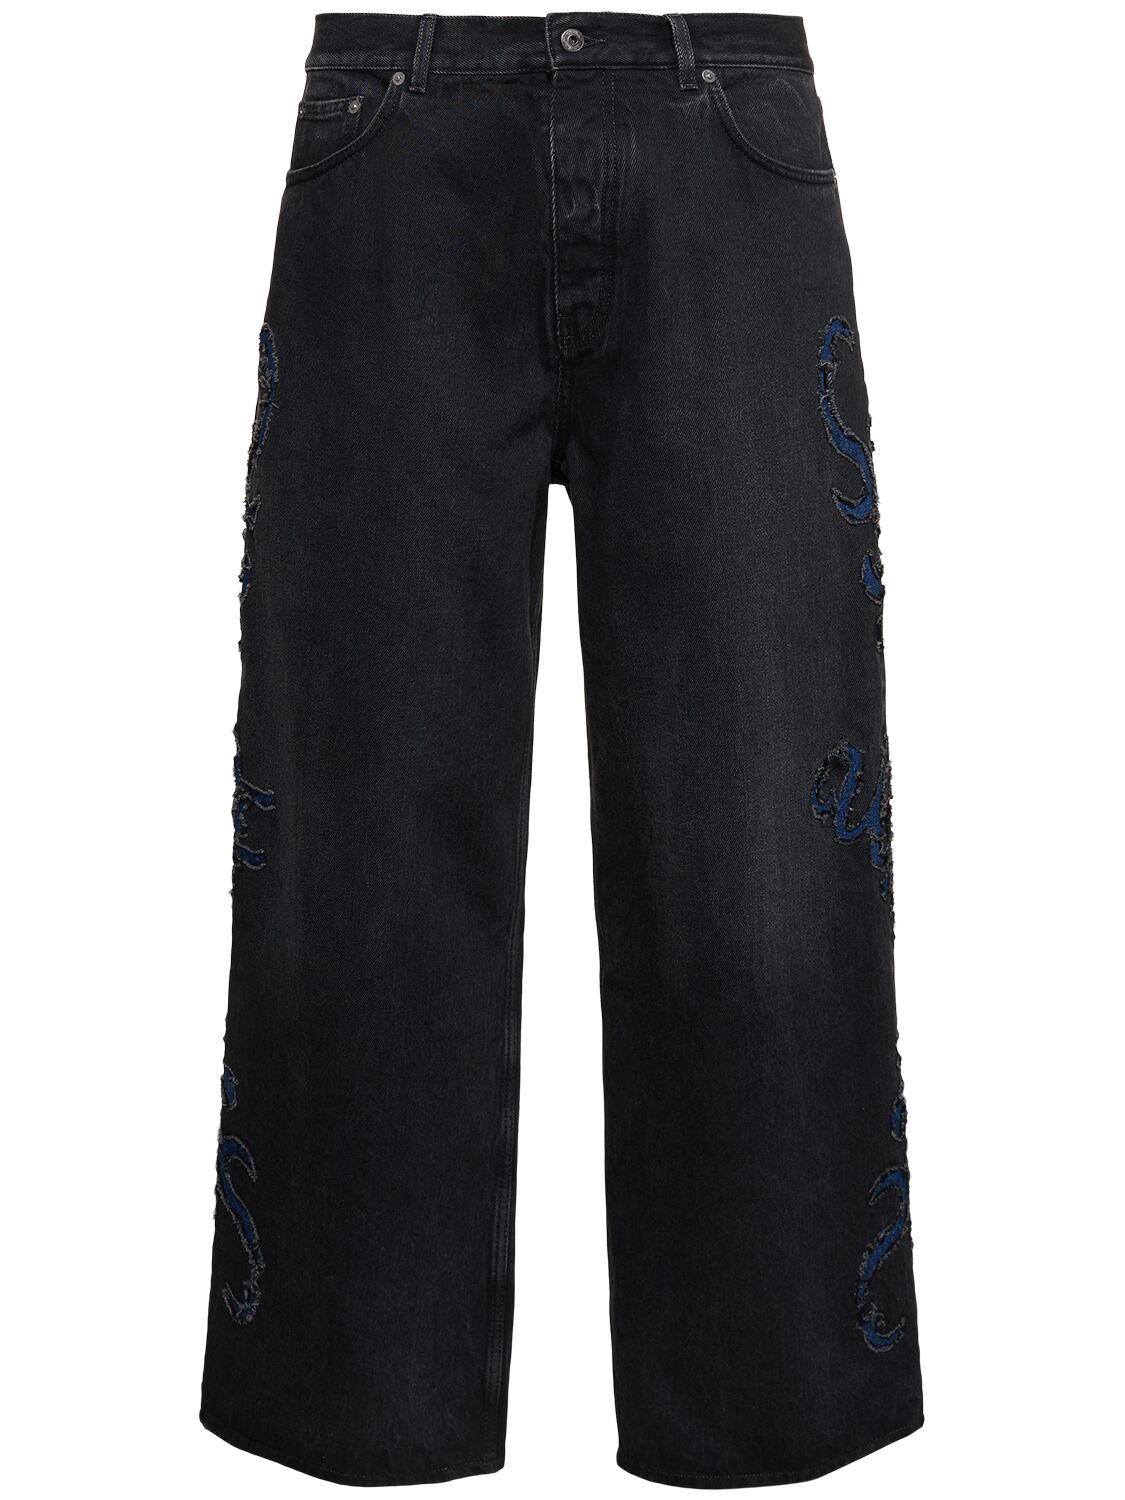 Image of Natlover Baggy Cotton Denim Jeans